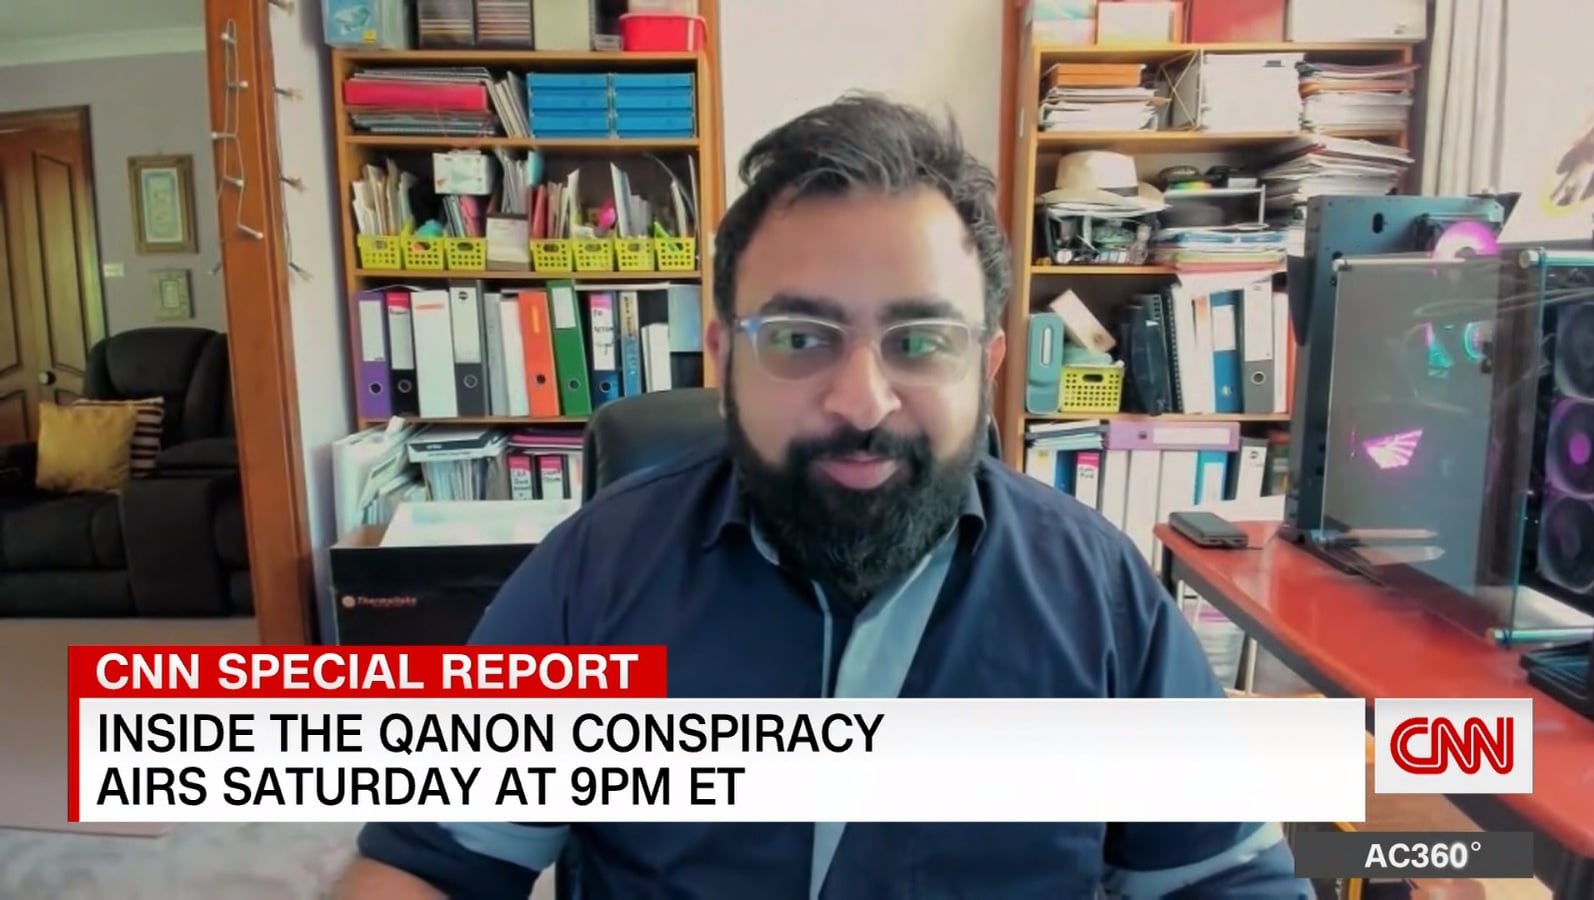 CNN anchor Anderson Cooper aired an extraordinary interview on Saturday with a former QAnon believer Jitarth Jadeja 